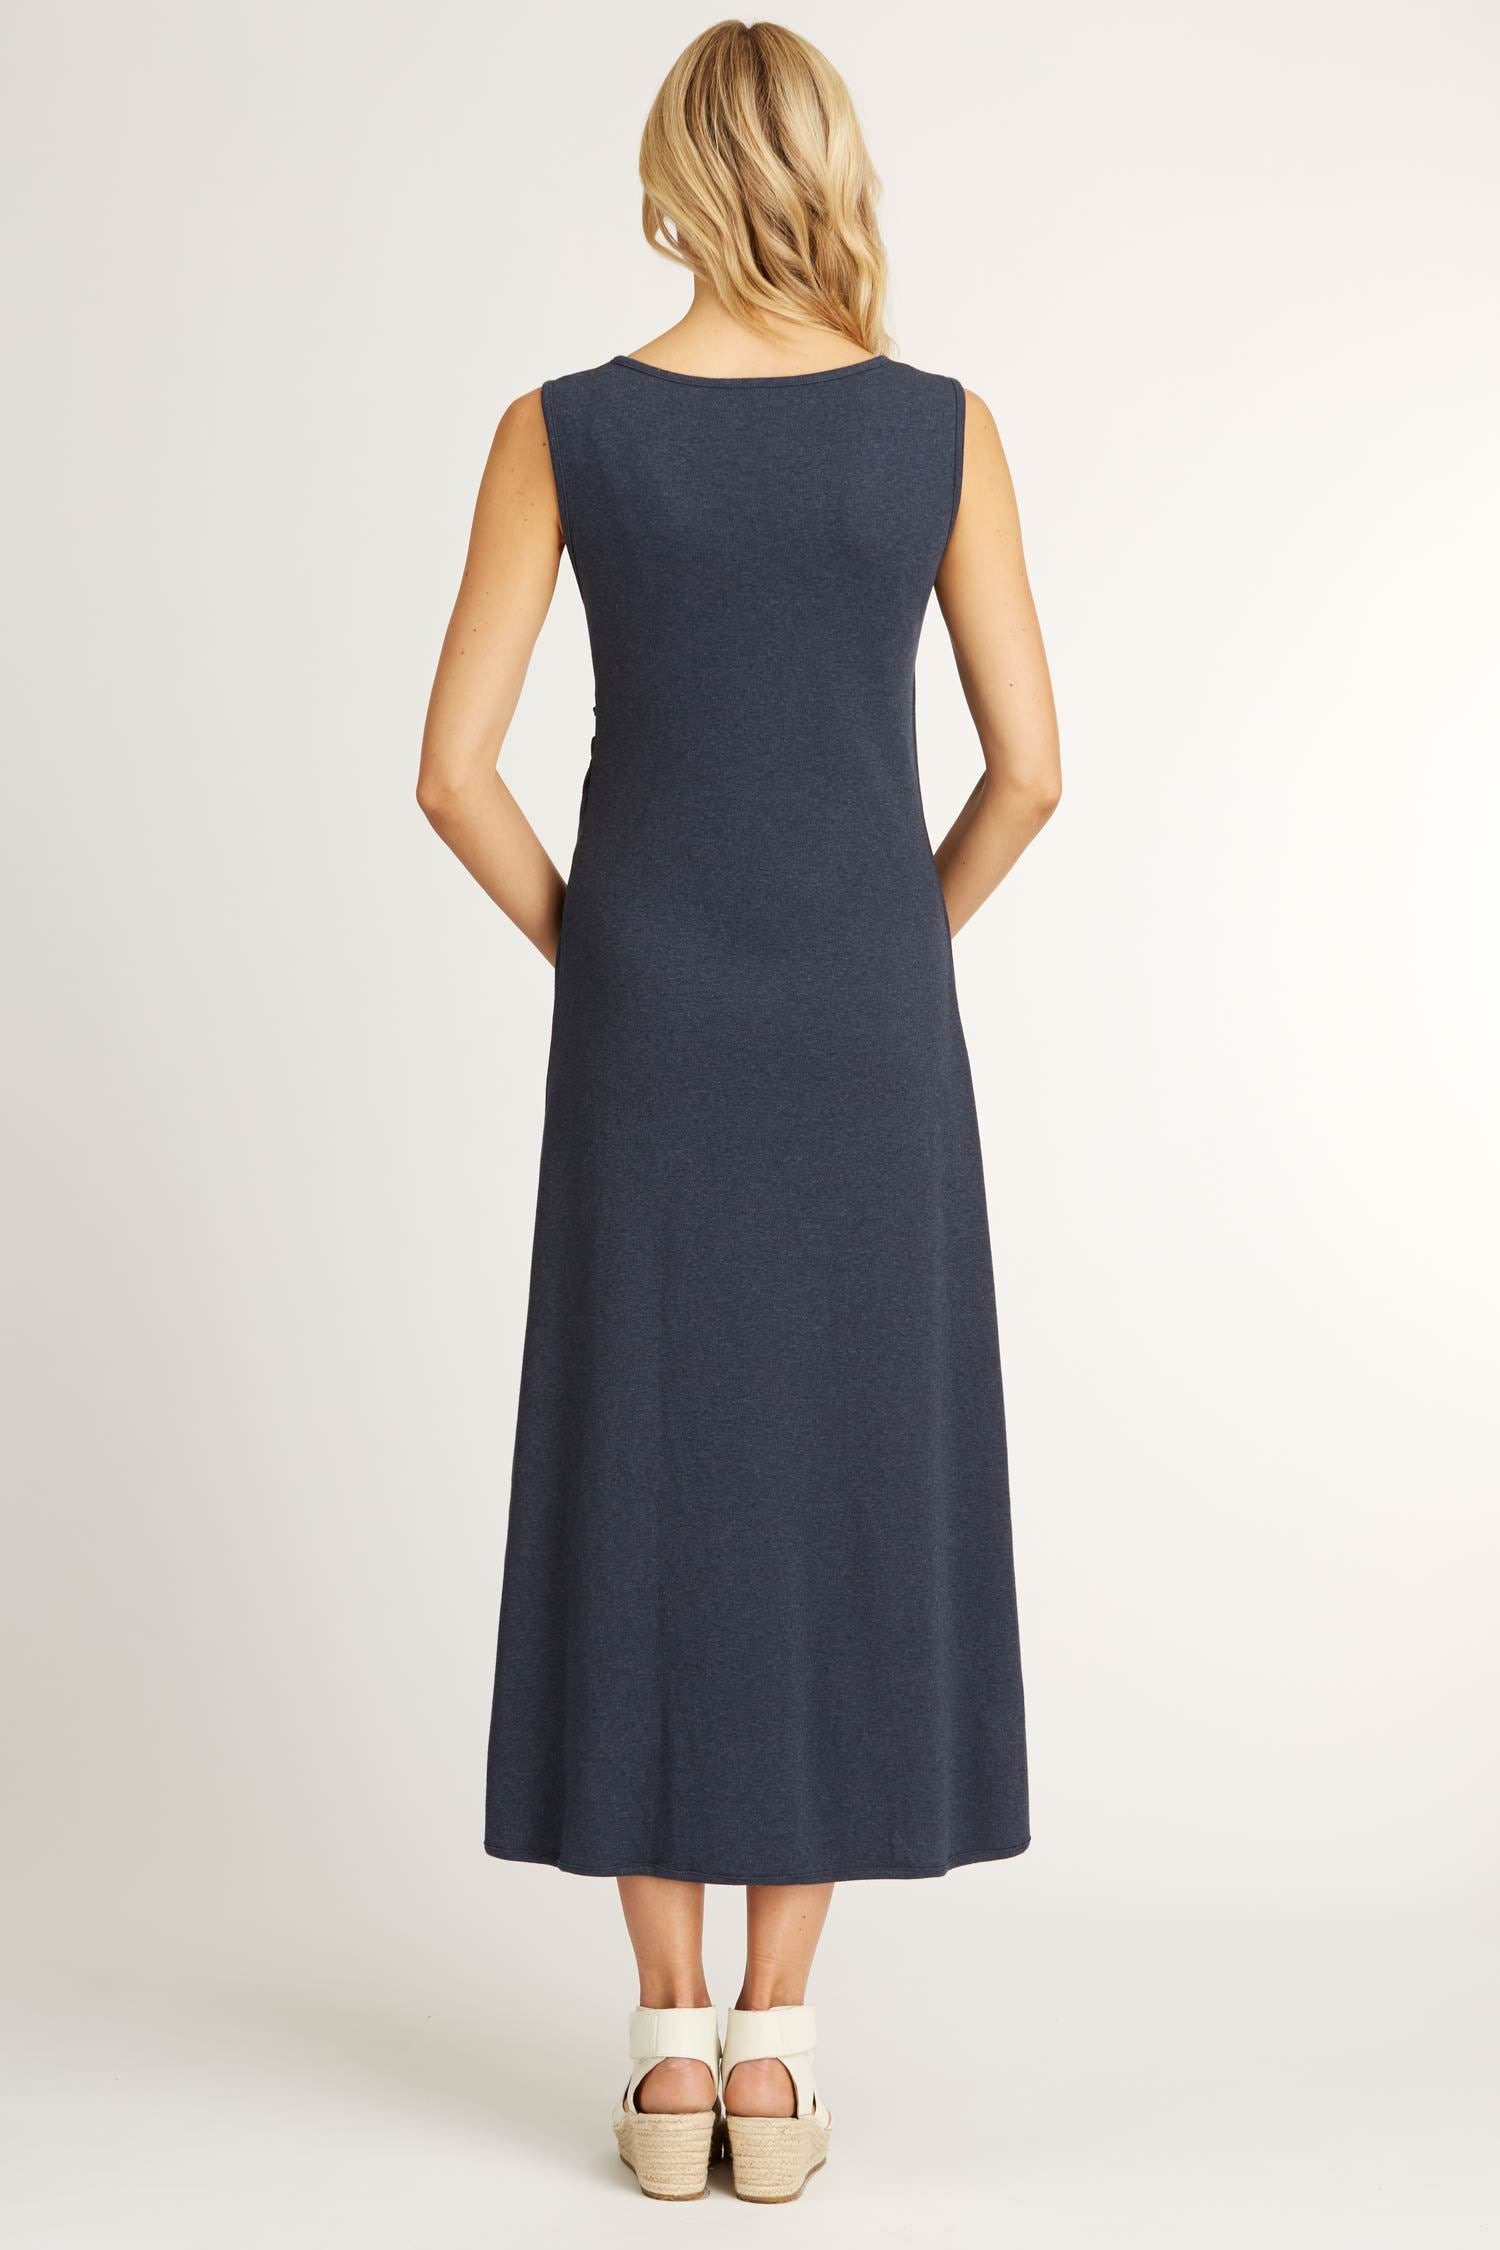 Womens Boatneck Maxi Dress in Navy Blue | Organic Cotton Clothing